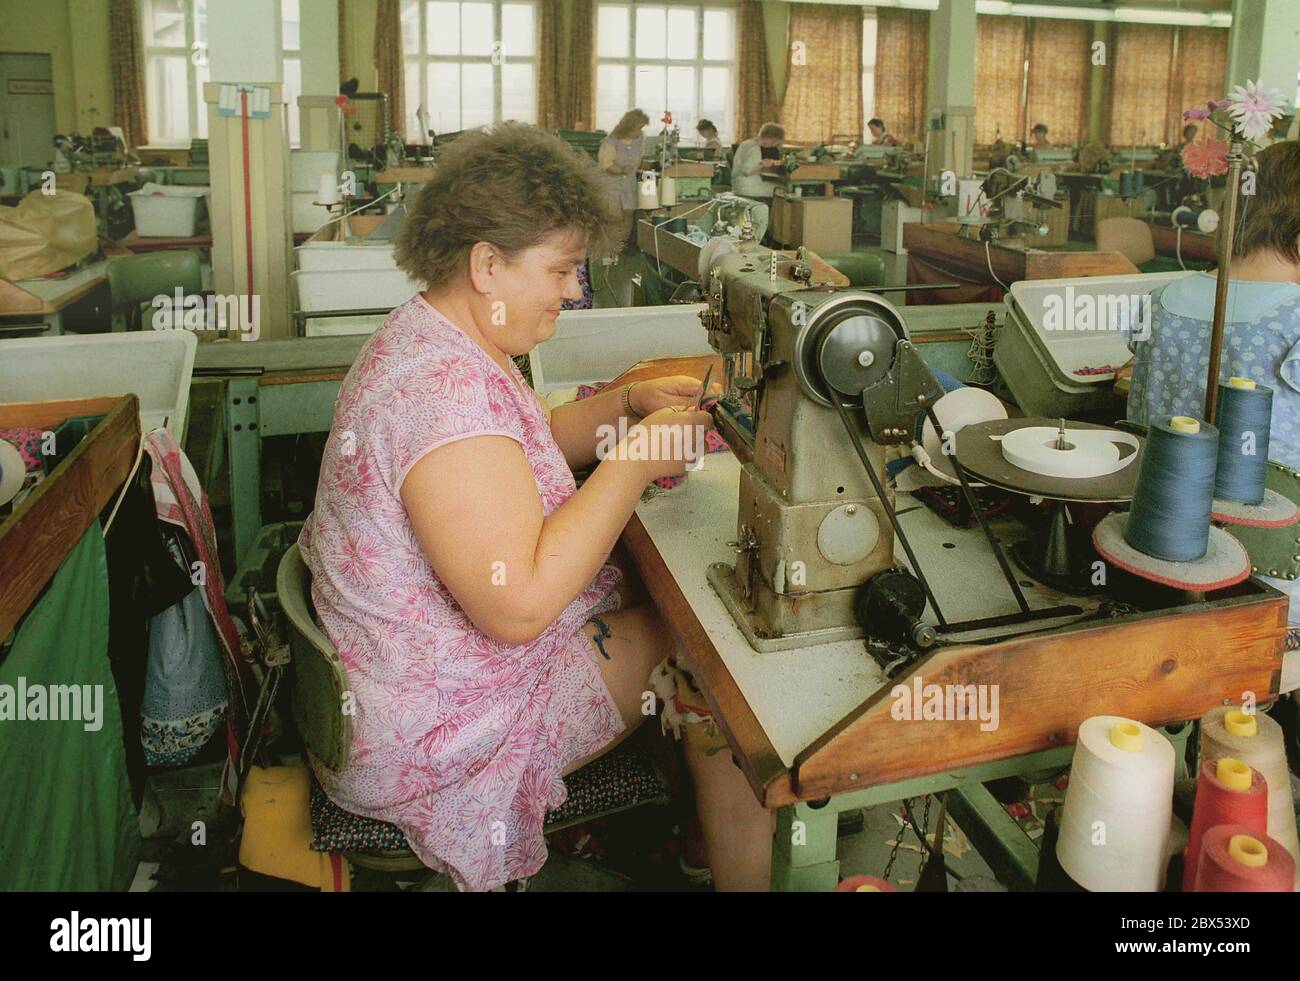 Federal States / Brandenburg / GDR / Industry / 1990 LUWA factory, Luckenwalder shoe factory. Produced sports shoes for the Soviet Union. It was not for sale. The photo shows how little the jobs were automated, low productivity. The factory was closed // Women / Labour / Trust / Federal States / GDR economy [automated translation] Stock Photo